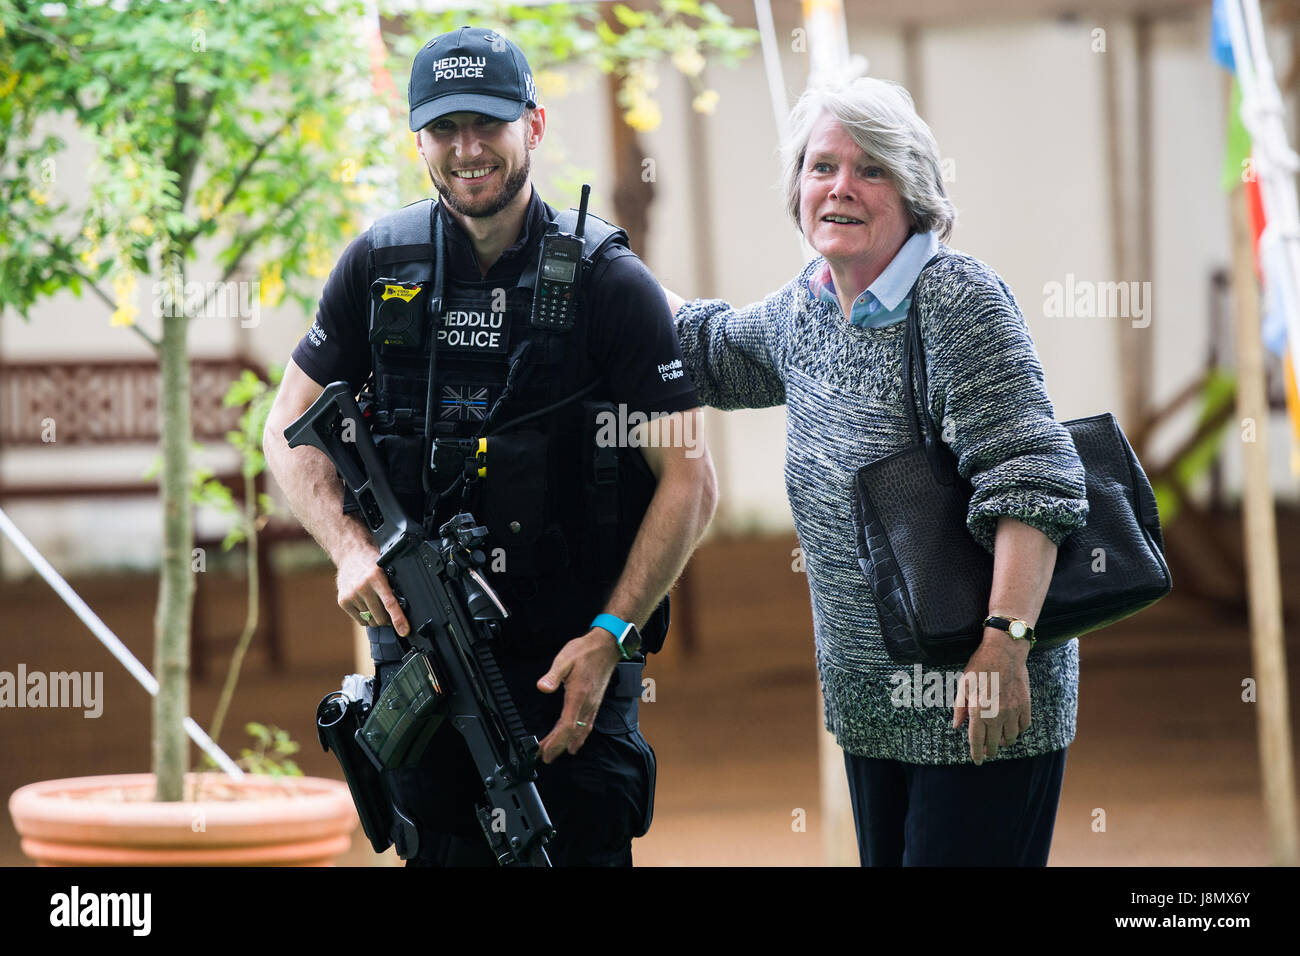 Hay Festival, Wales UK, Monday 29 May 2017 Armed police officers patrolling the site of the 2017 Hay Festival on Bank Holiday Monday Now in its 30th year, the festival draws tens of thousand of visitors a day to what was described by former US president Bill Clinton as 'the woodstock of the mind' Photo credit Credit: keith morris/Alamy Live News Stock Photo